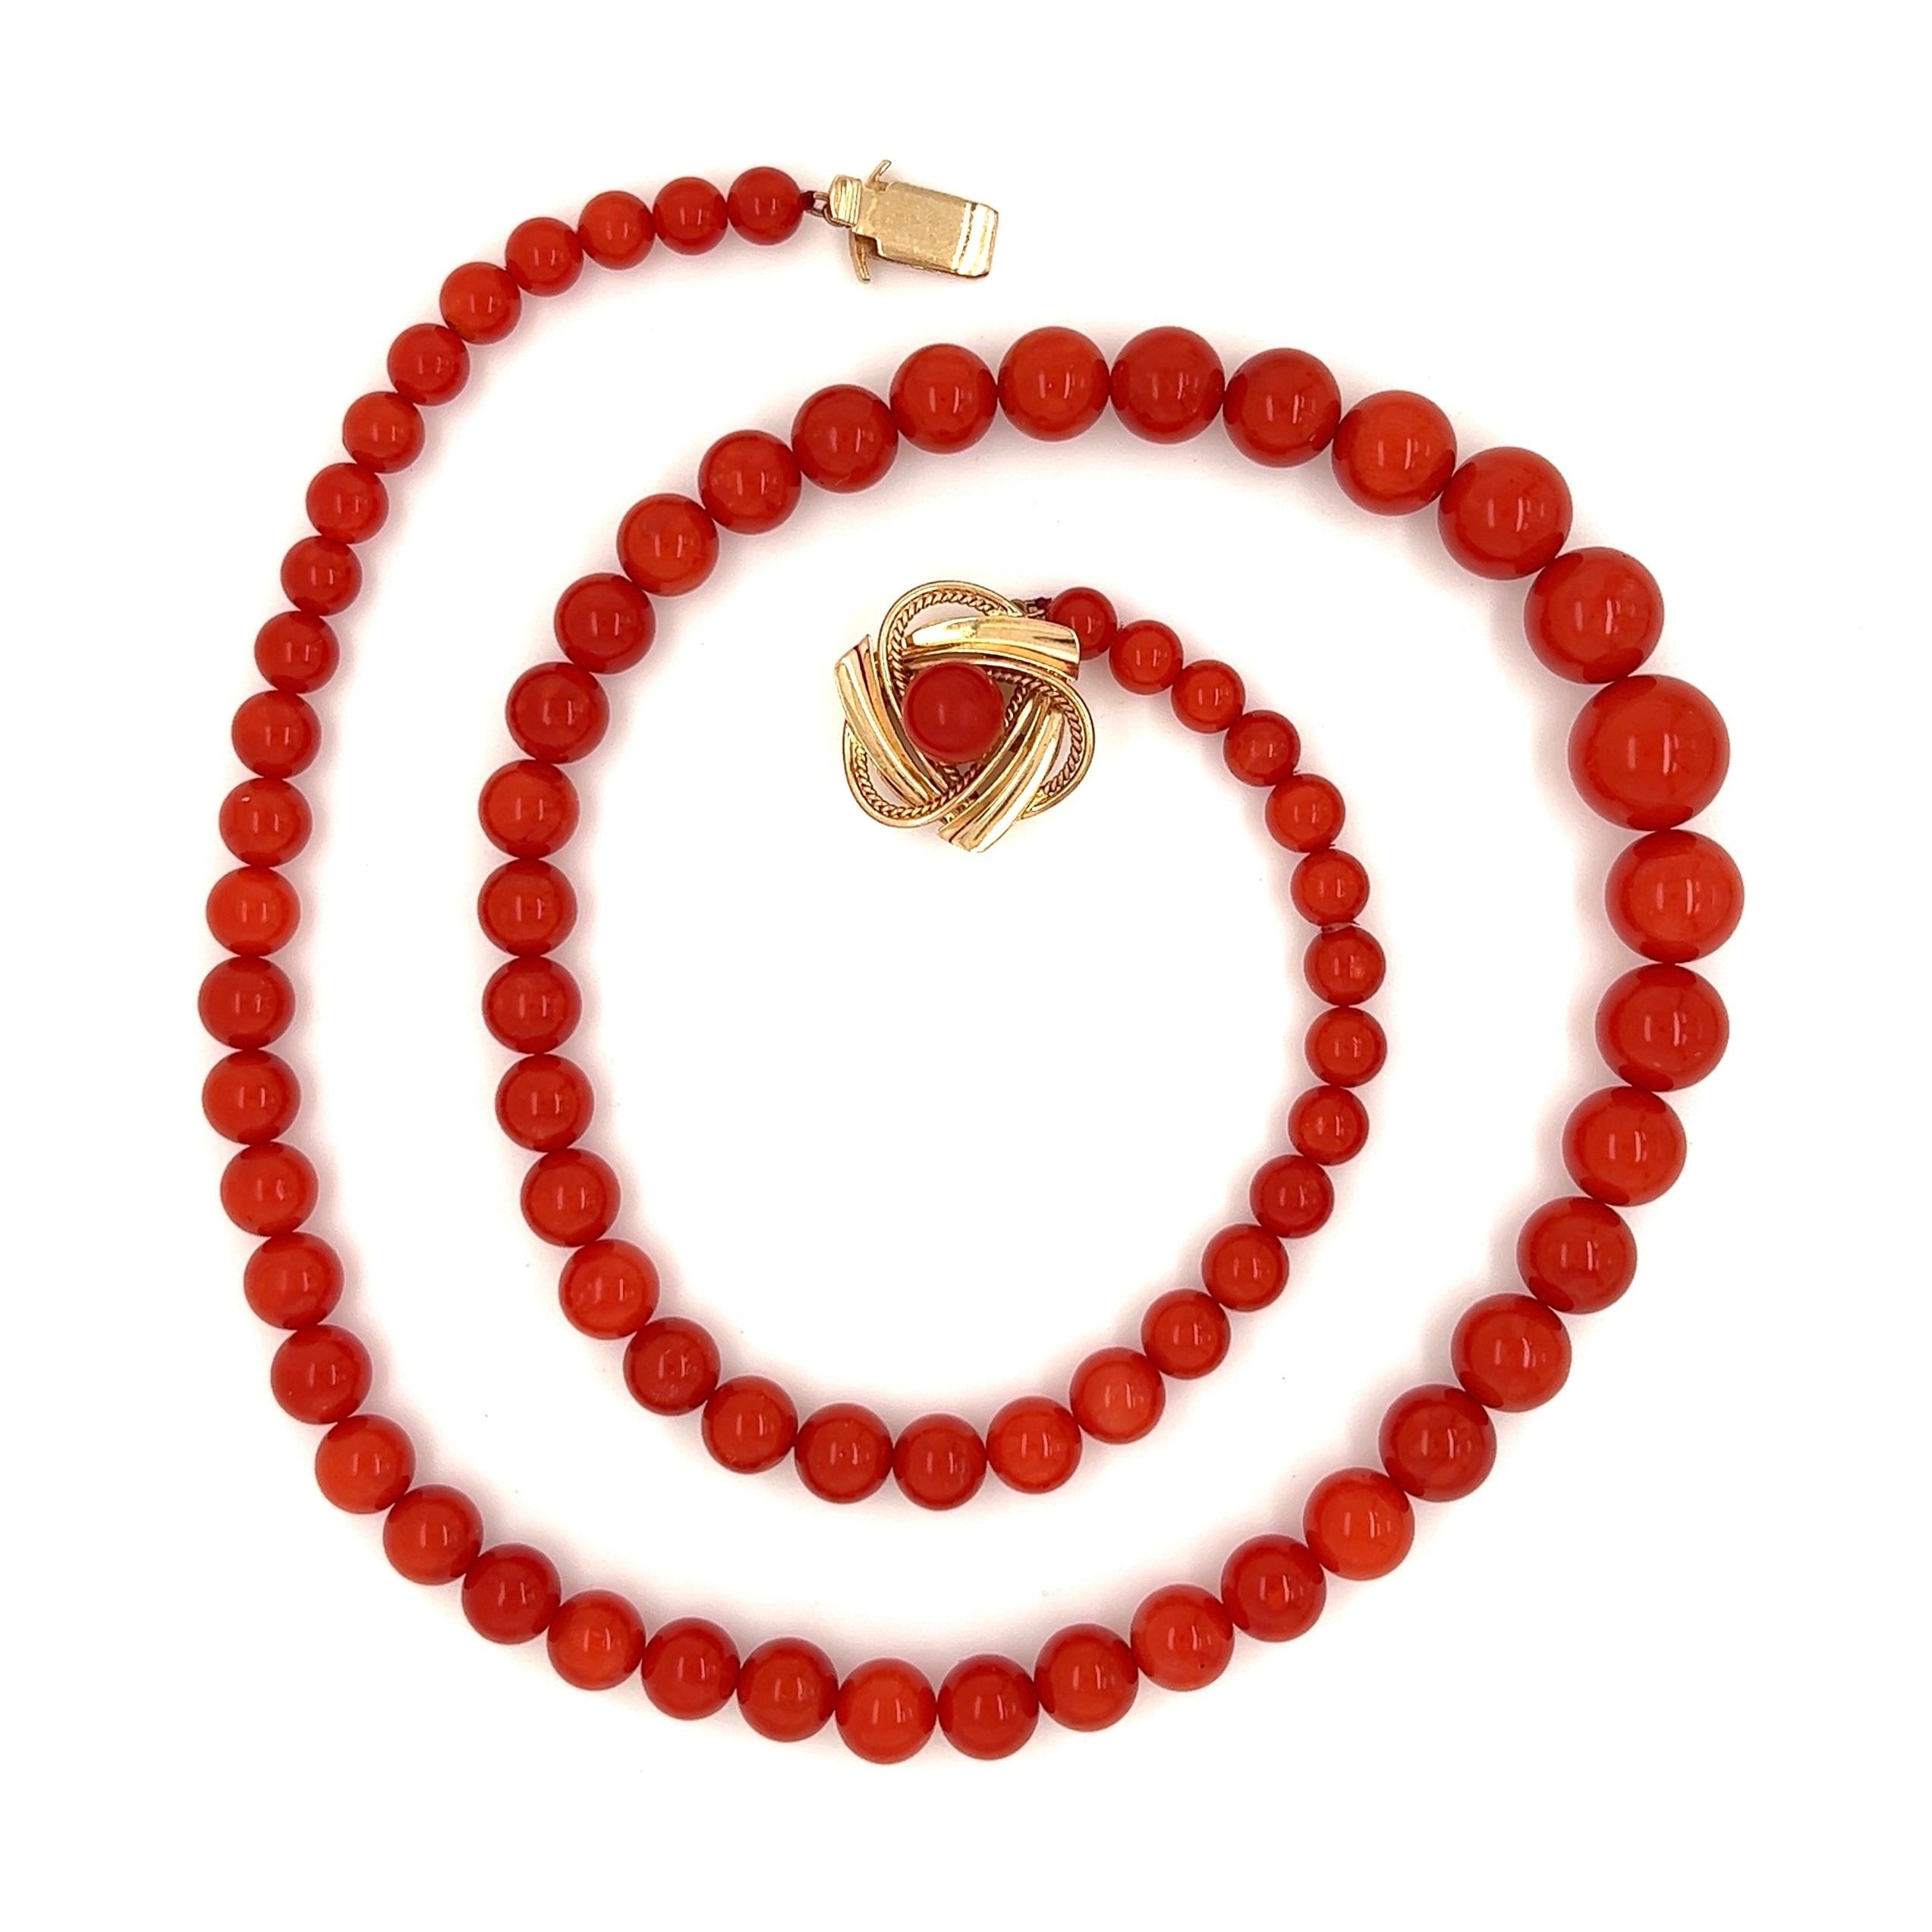 Simply Beautiful! Natural Red Coral Beads, measuring approx. 10.3-5.00mm Necklace. Hand knotted with matching thread and finished with a 14K Yellow Gold clasp. Necklace measures approx. 18”. Sure to be admired… Illuminating your Look with a touch of